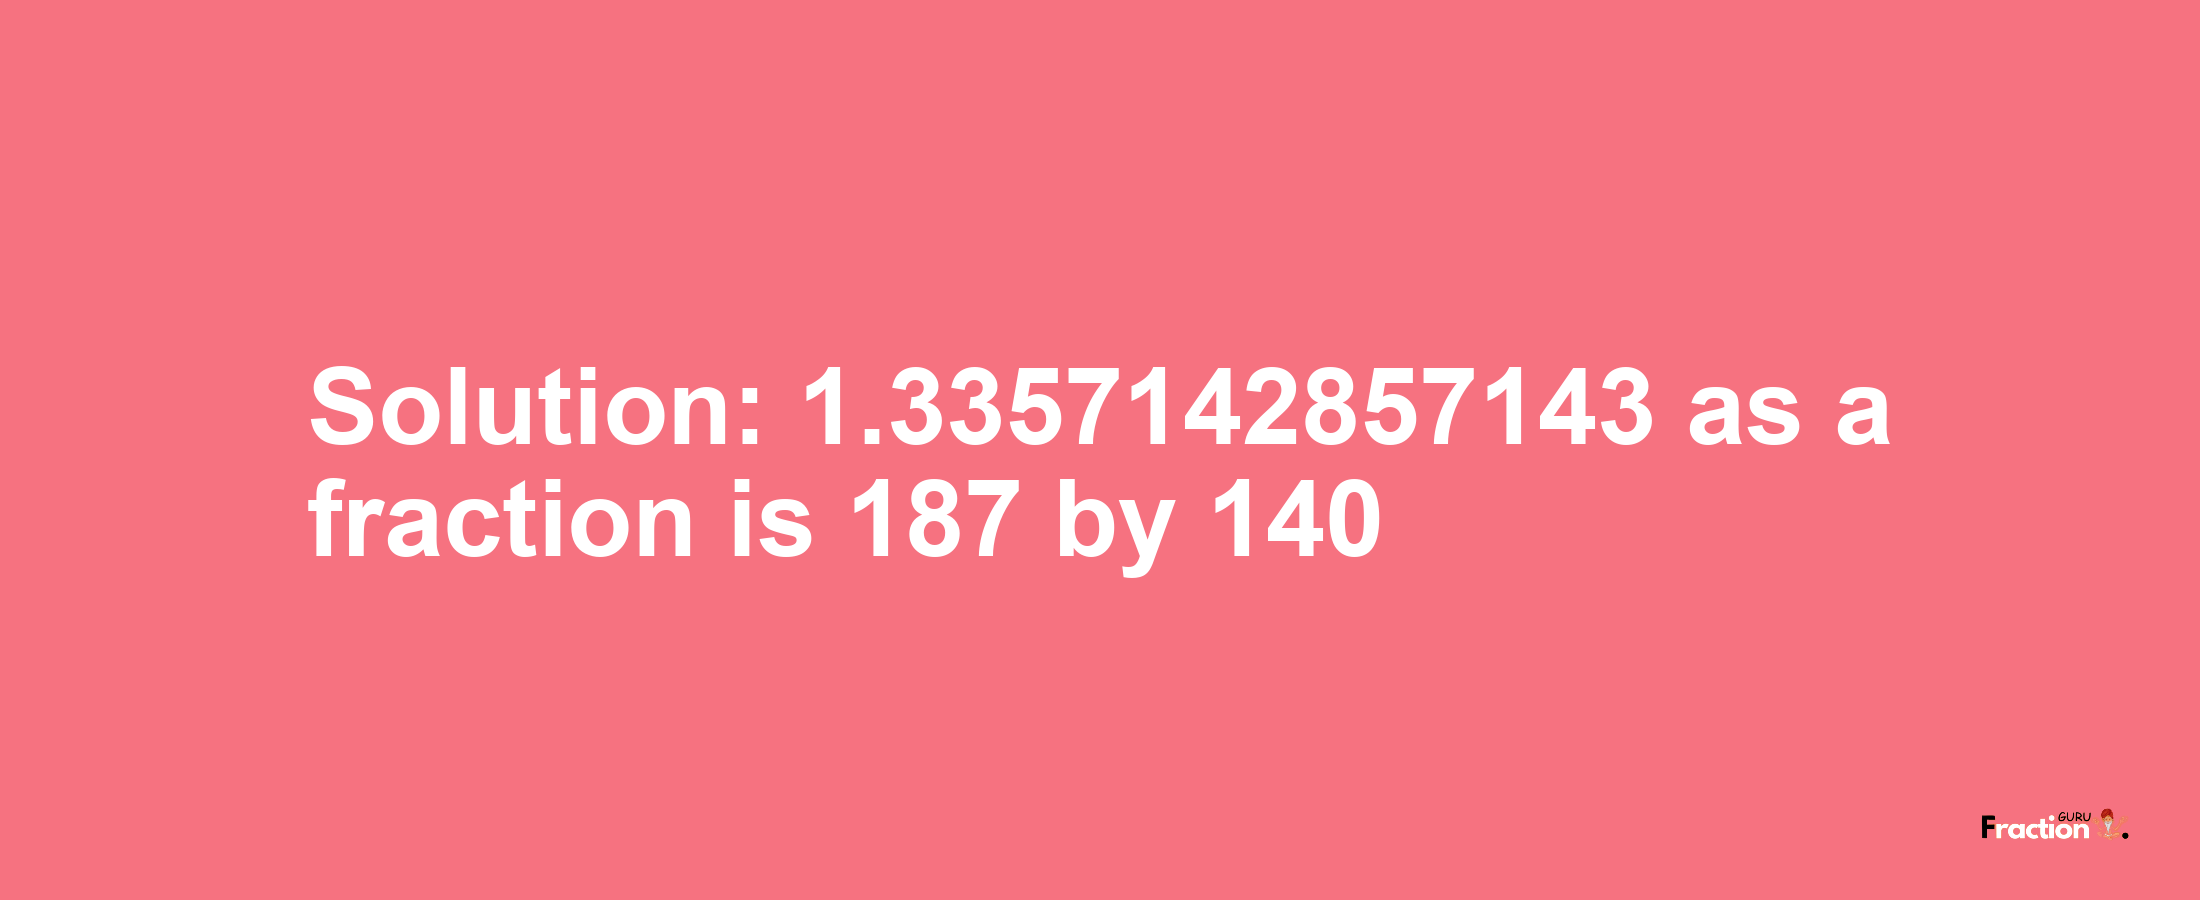 Solution:1.3357142857143 as a fraction is 187/140